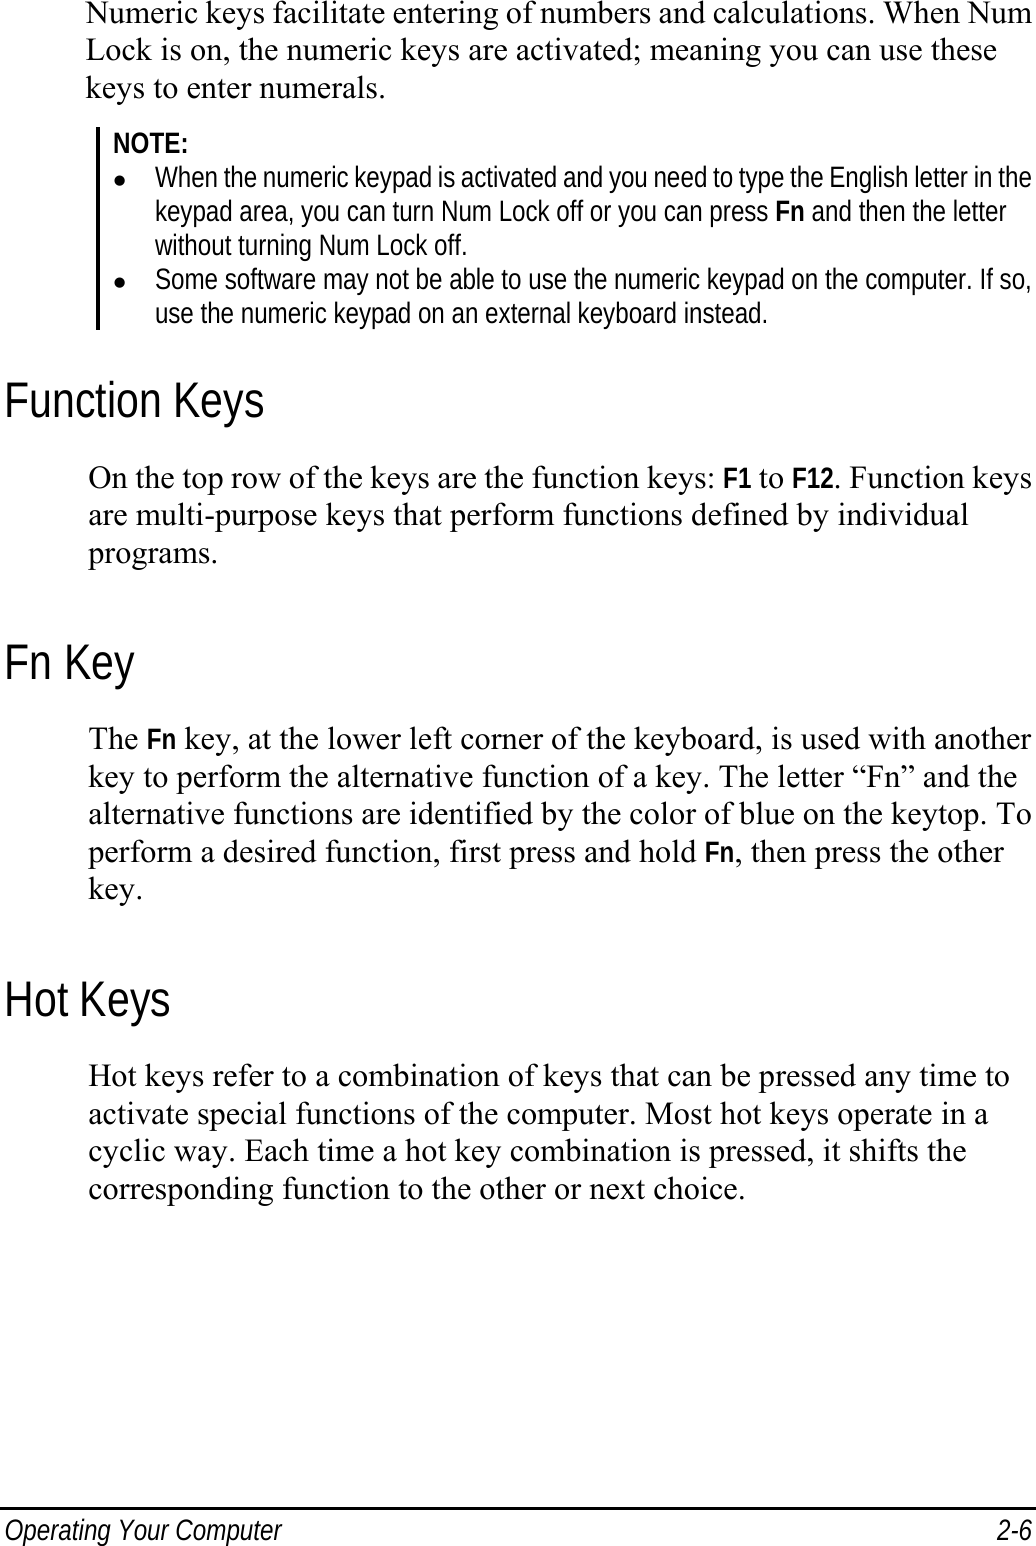  Operating Your Computer  2-6 Numeric keys facilitate entering of numbers and calculations. When Num Lock is on, the numeric keys are activated; meaning you can use these keys to enter numerals. NOTE: z When the numeric keypad is activated and you need to type the English letter in the keypad area, you can turn Num Lock off or you can press Fn and then the letter without turning Num Lock off. z Some software may not be able to use the numeric keypad on the computer. If so, use the numeric keypad on an external keyboard instead. Function Keys On the top row of the keys are the function keys: F1 to F12. Function keys are multi-purpose keys that perform functions defined by individual programs. Fn Key The Fn key, at the lower left corner of the keyboard, is used with another key to perform the alternative function of a key. The letter “Fn” and the alternative functions are identified by the color of blue on the keytop. To perform a desired function, first press and hold Fn, then press the other key. Hot Keys Hot keys refer to a combination of keys that can be pressed any time to activate special functions of the computer. Most hot keys operate in a cyclic way. Each time a hot key combination is pressed, it shifts the corresponding function to the other or next choice. 